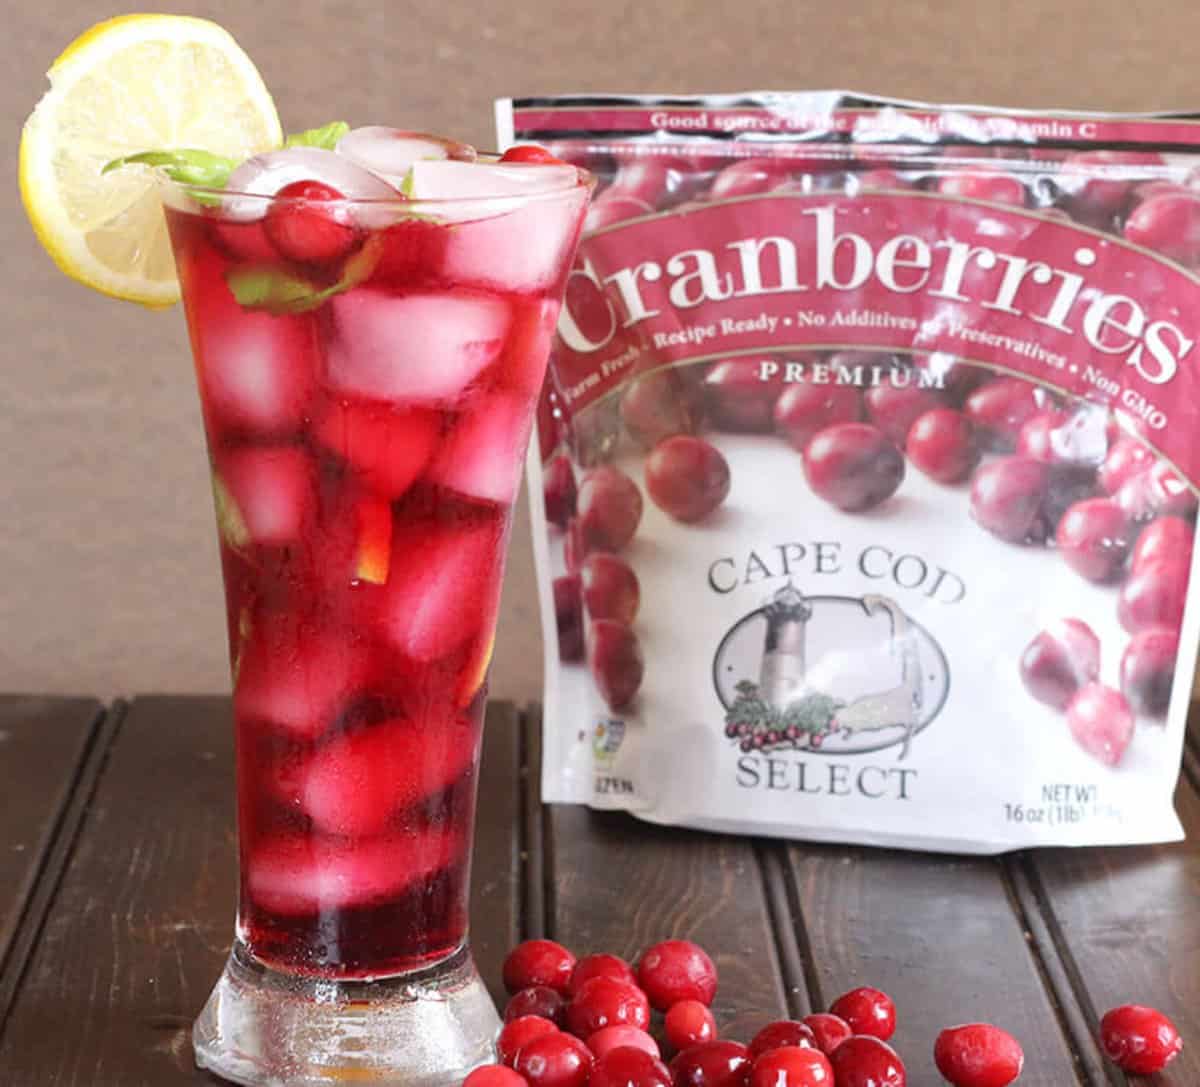 Homemade cranberry lemonade with real, fresh ingredients, served in a tall glass filled with ice and garnished with a slice of lemon.